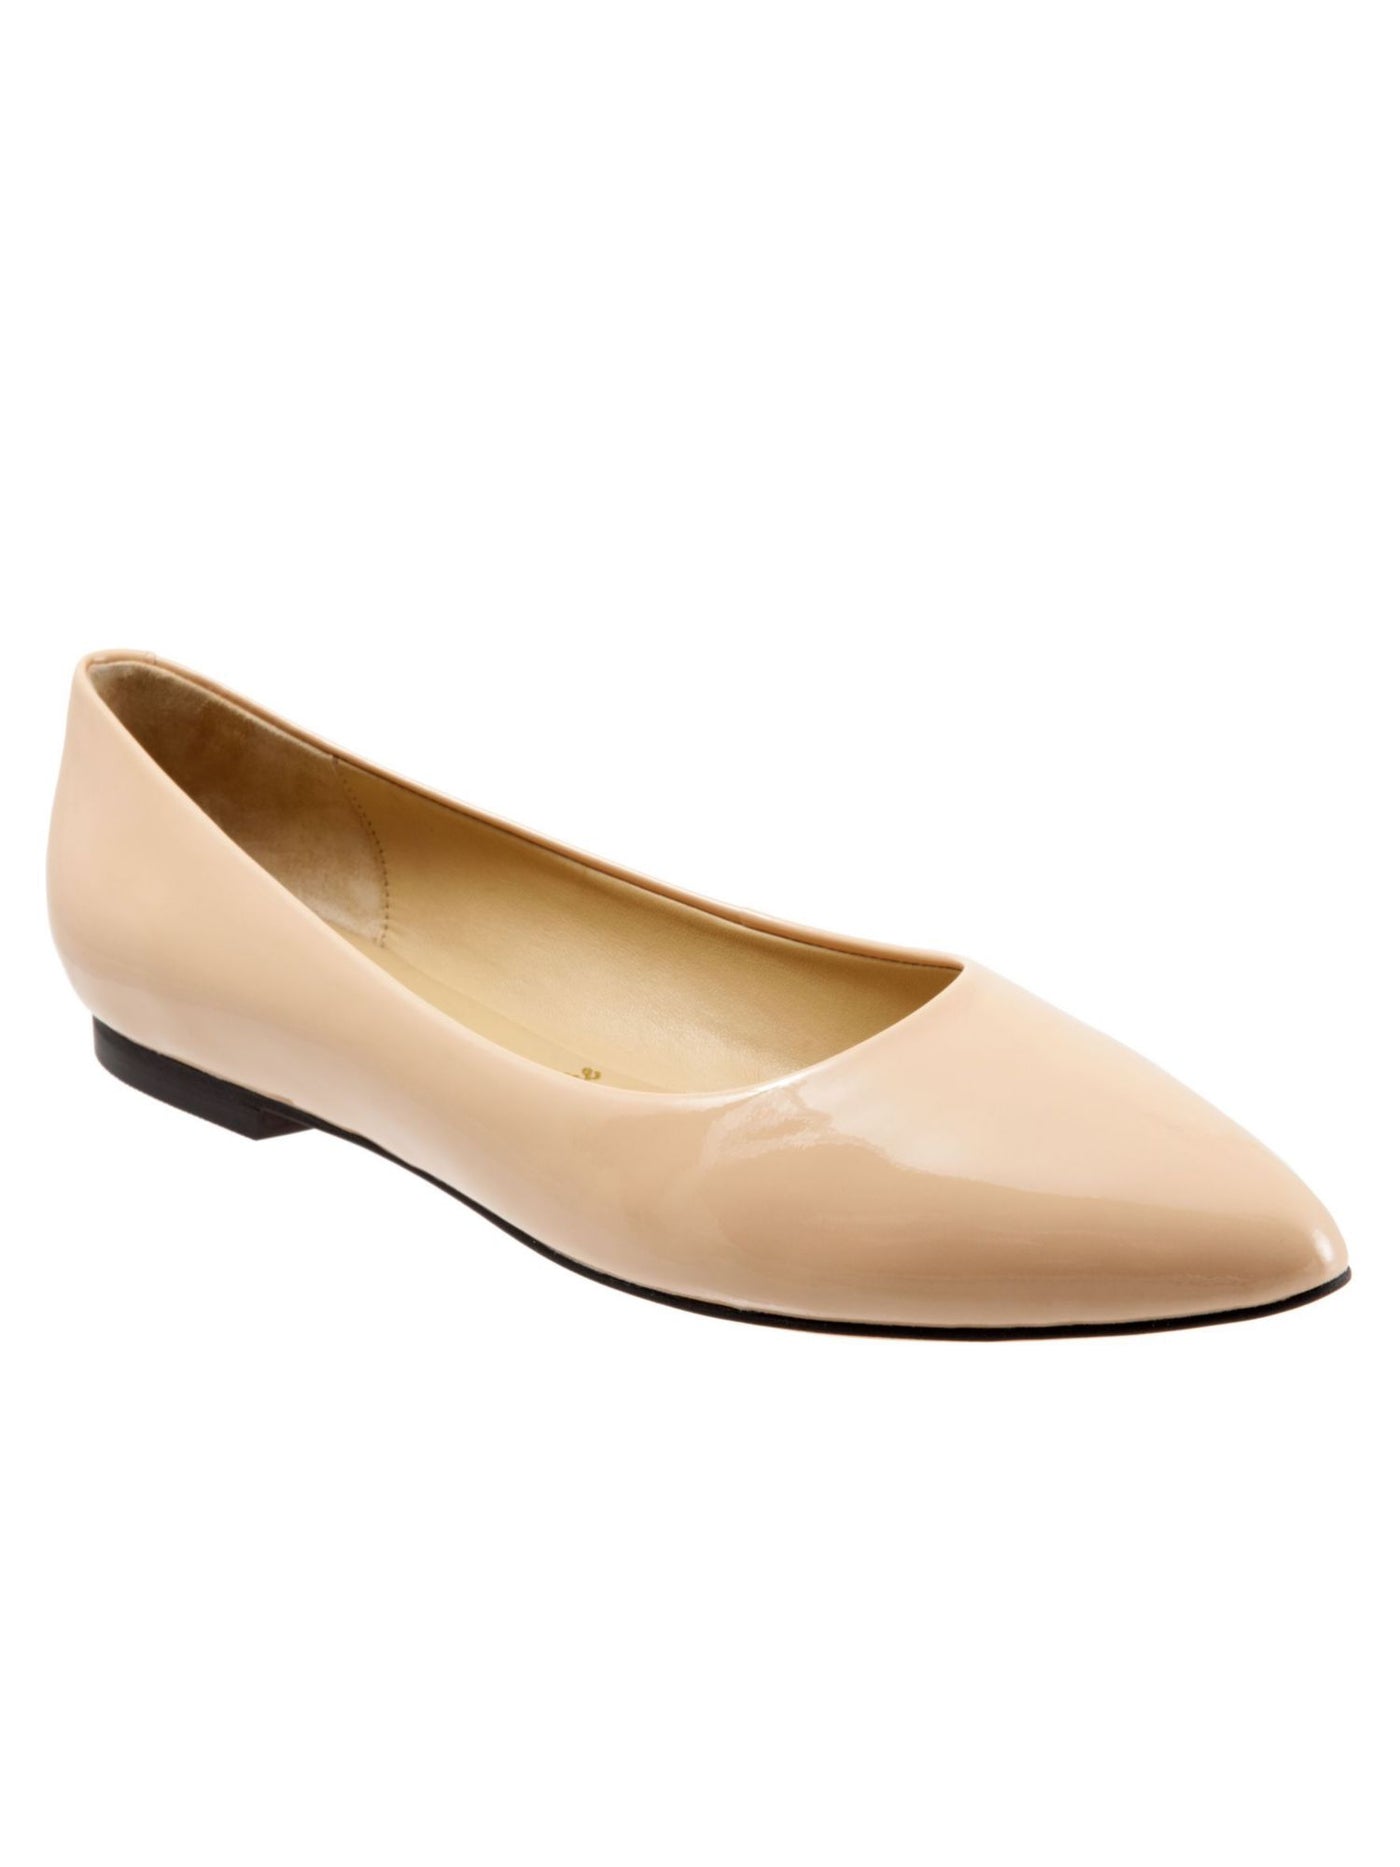 TROTTERS Womens Beige Cushioned Estee Pointed Toe Slip On Leather Flats Shoes 10 M